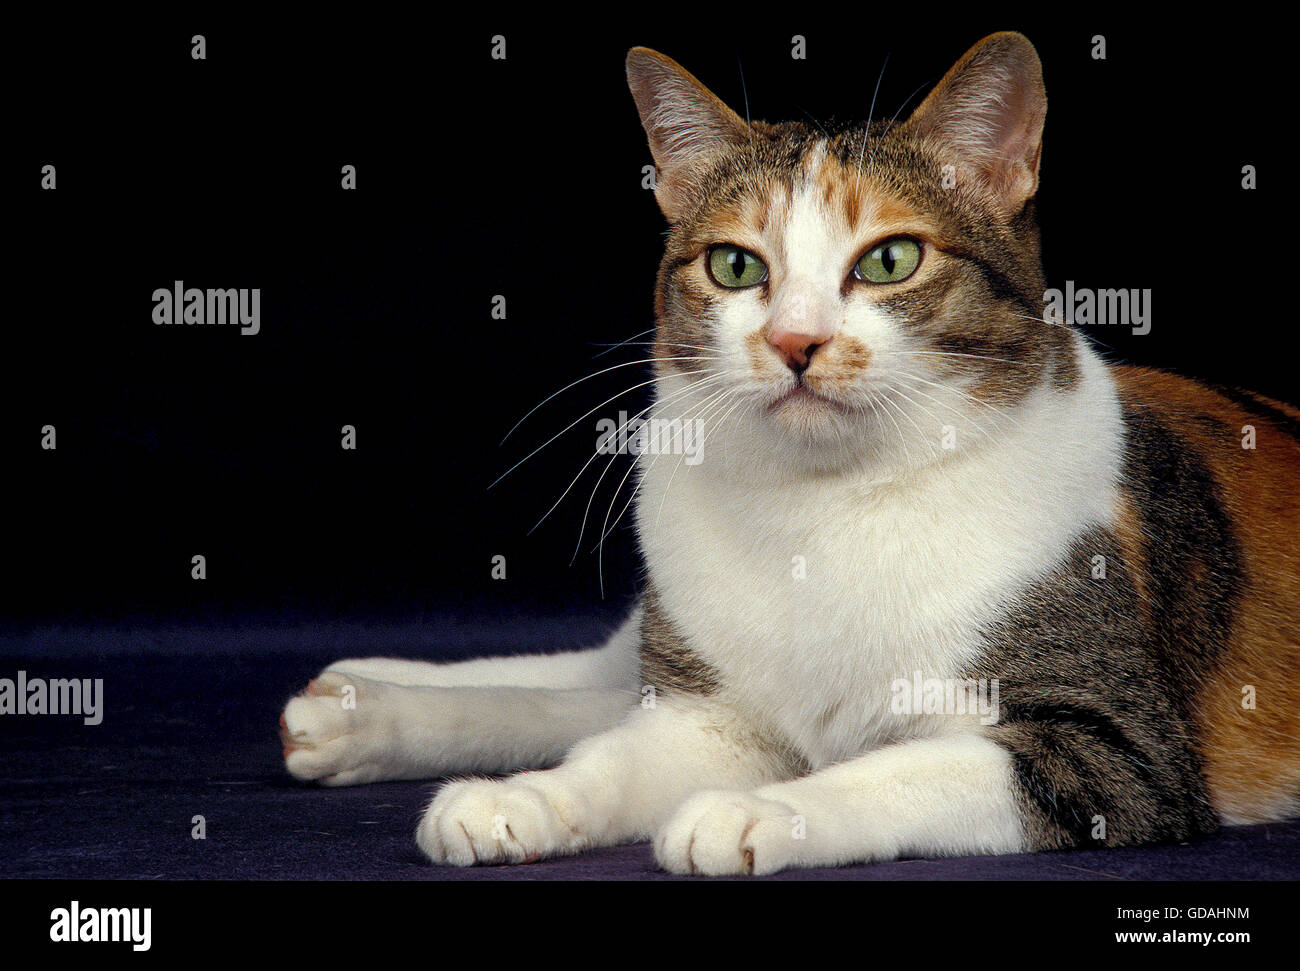 JAPANESE BOBTAIL DOMESTIC CAT, ADULT LAYING DOWN AGAINST BLACK BACKGROUND Stock Photo